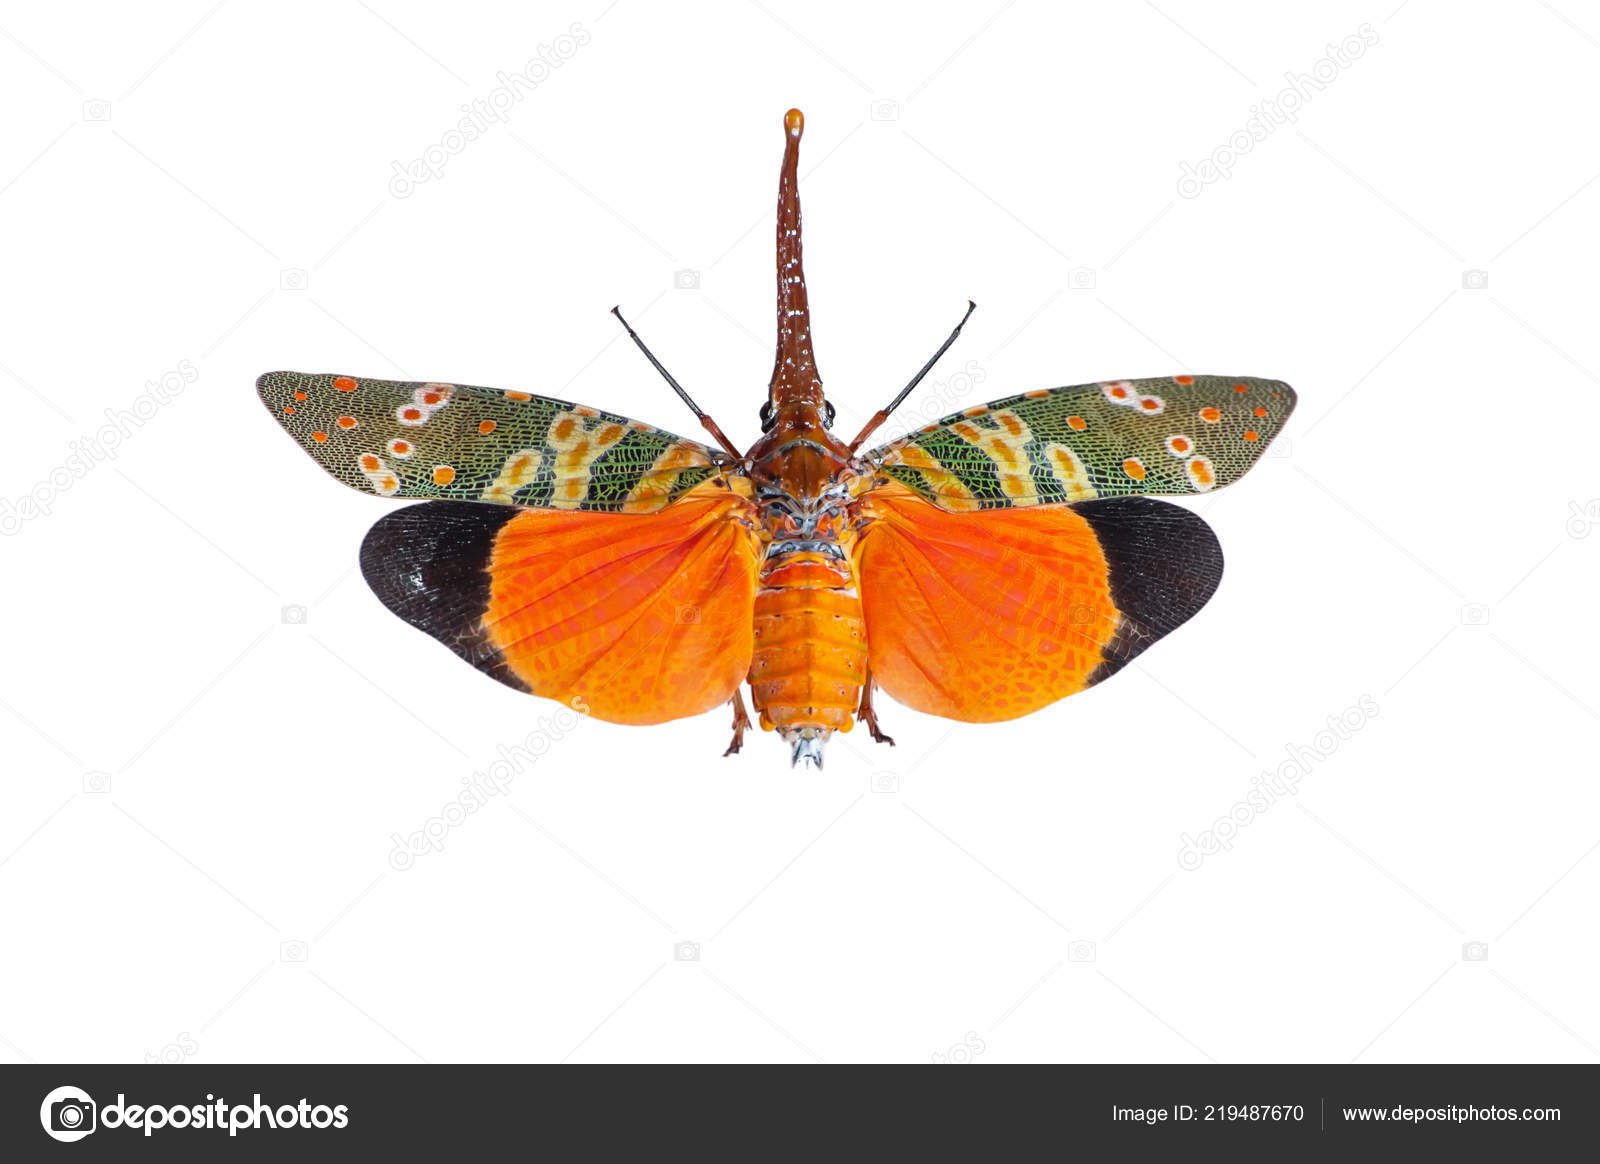 Laternaria Pyrops spinolae Bright Orange Taxidermy REAL Insect 